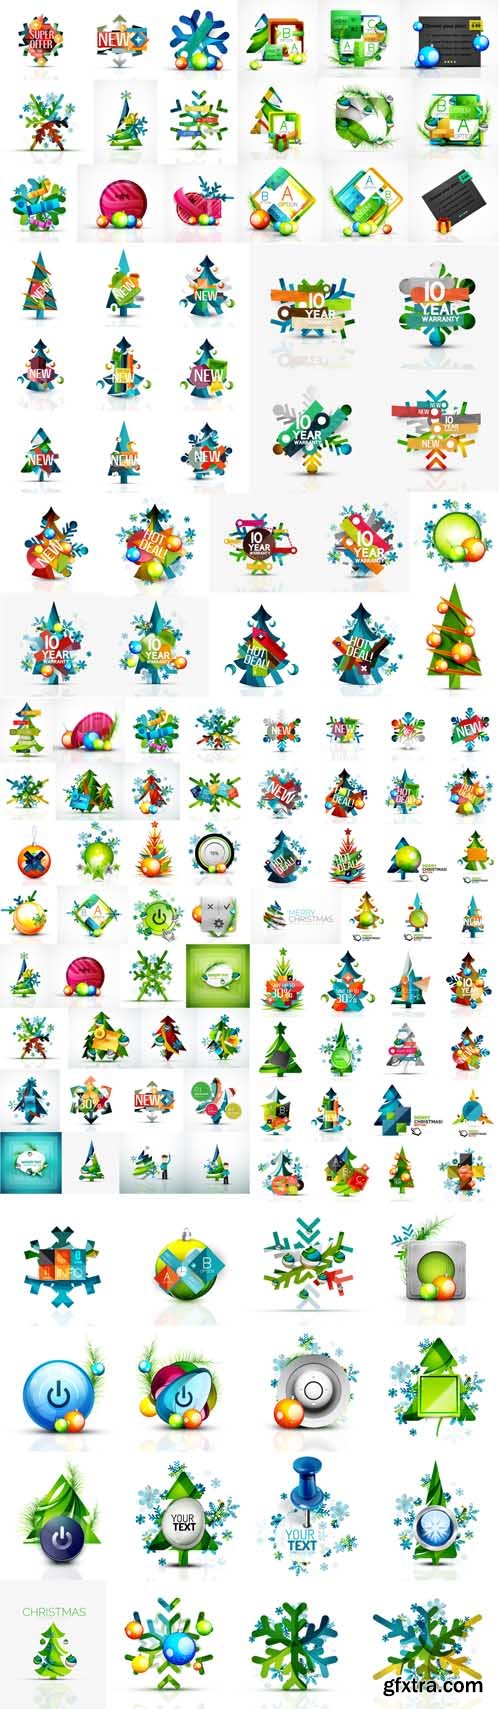 Set of Various Geometric Abstract Christmas Concepts